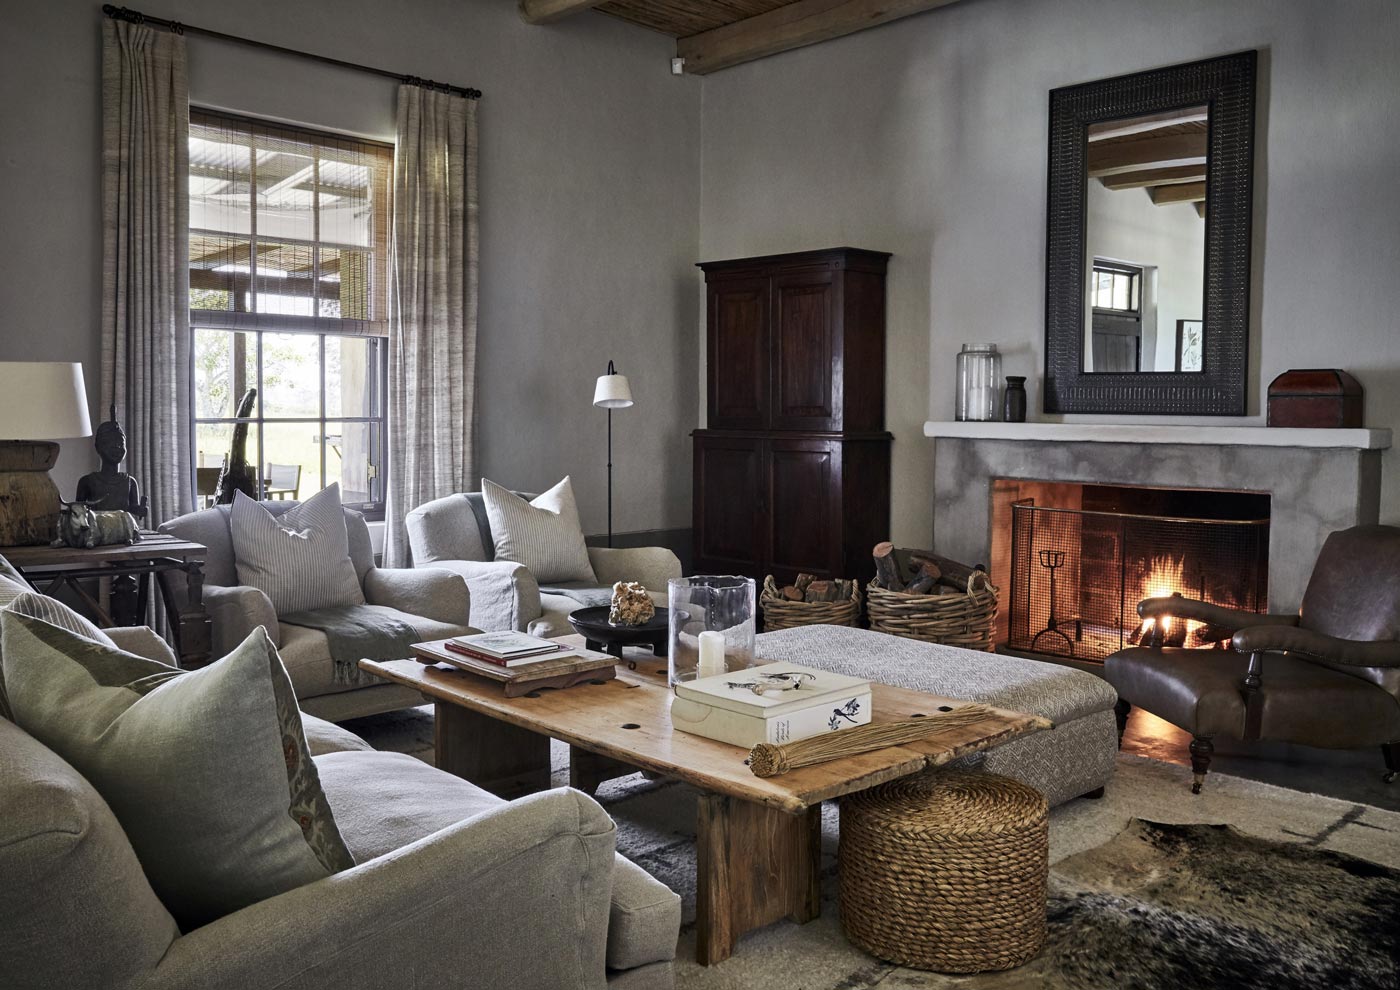 Weekday Wanderlust | Places: Bobbejaanskloof Private Nature Reserve, South Africa